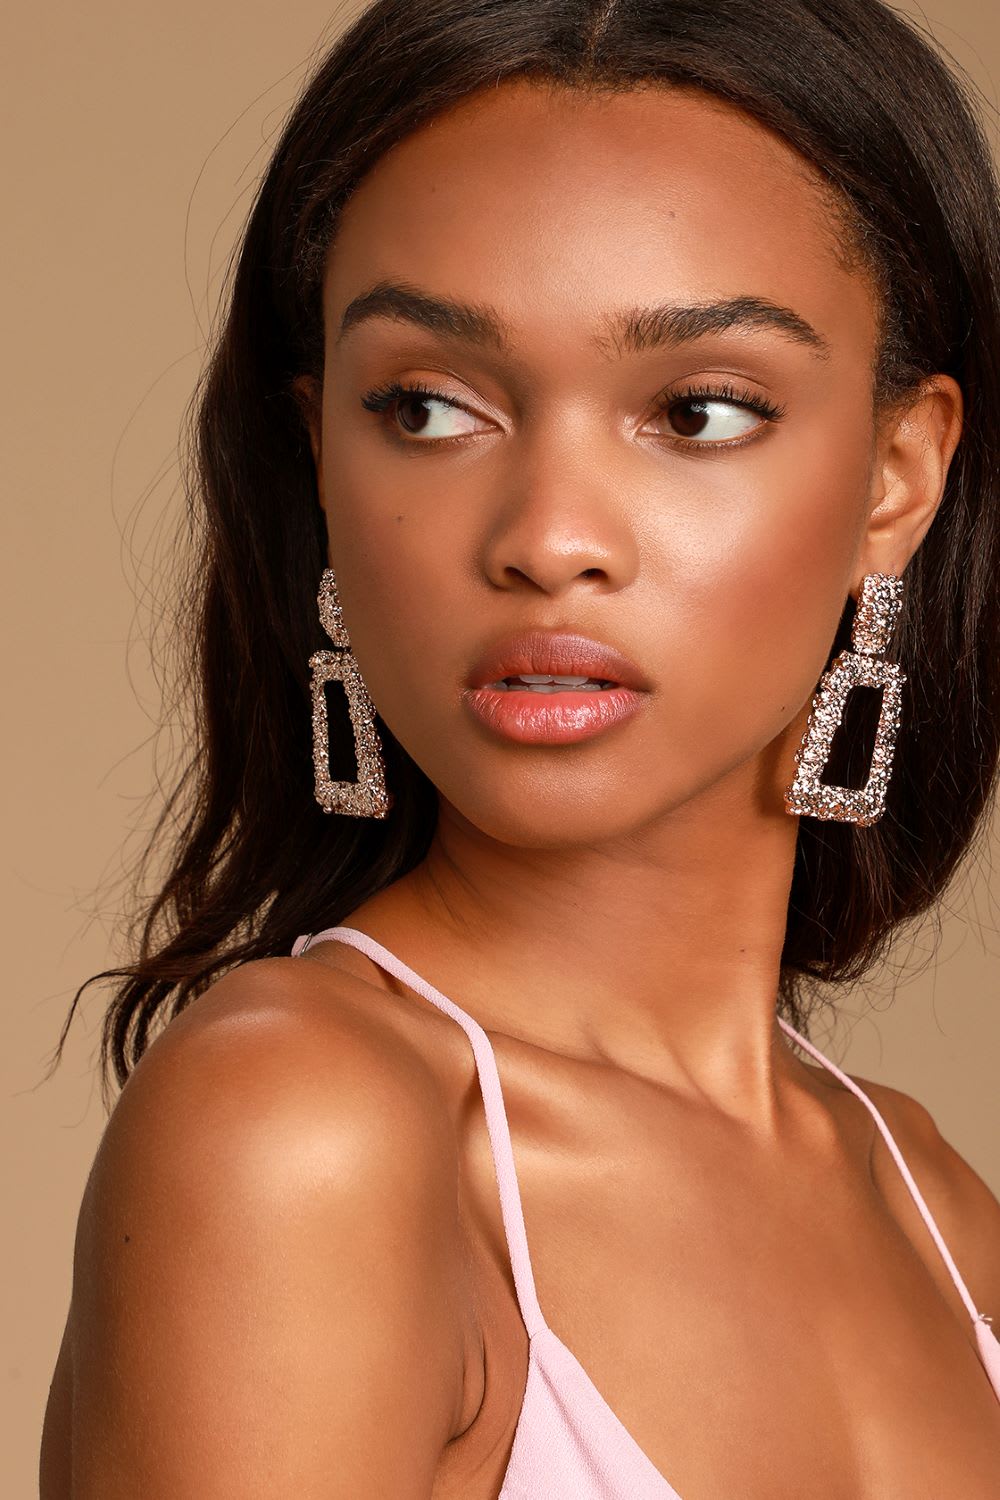 Jewelry Trends: 16 Statement Earrings for 2019 - Lulus.com Fashion Blog